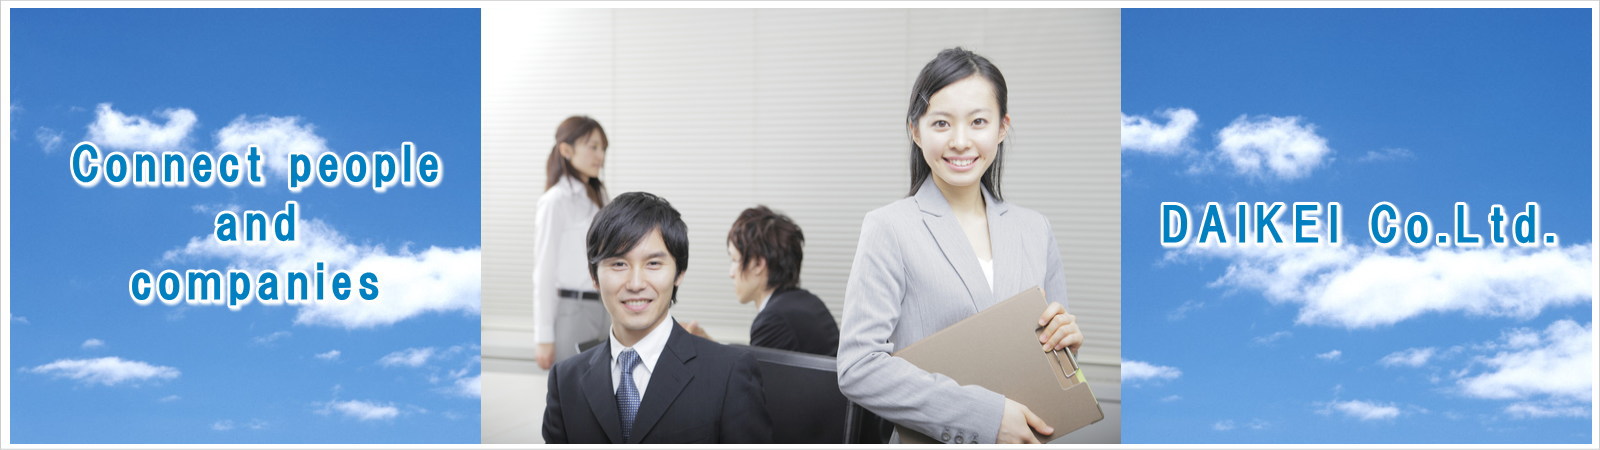 It is Daikei Temporary Staffing Company Limited Company in Kakamigahara, Gifu Prefecture.